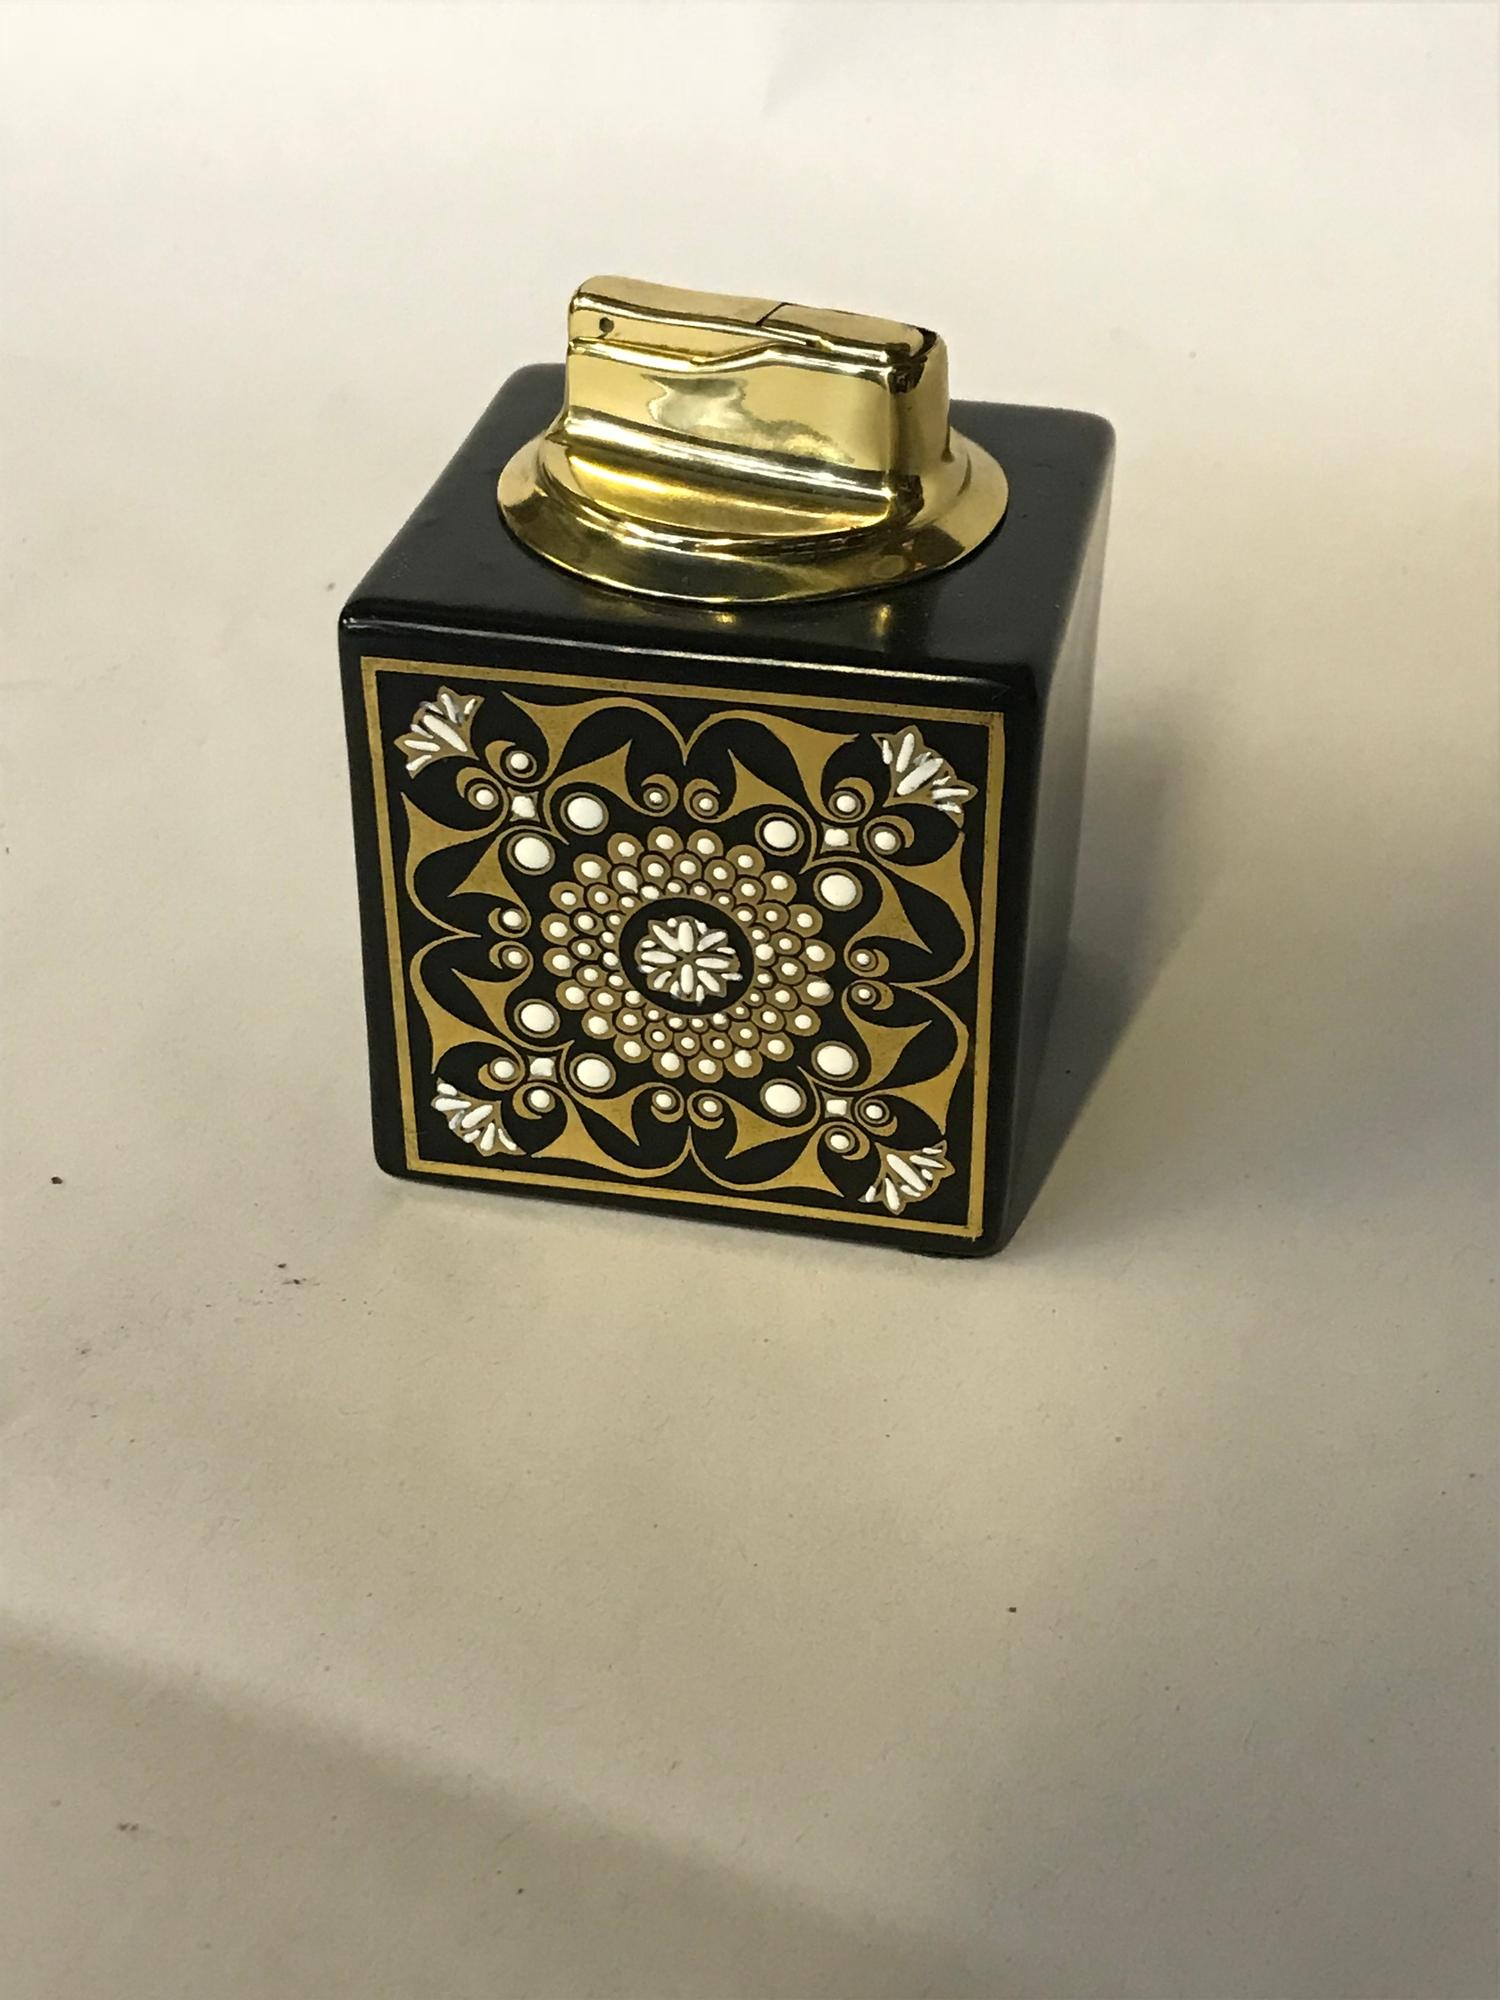 Carlton ware 1970s Psychedelic ashtray styled with gilt finish against the black together with - Image 2 of 3